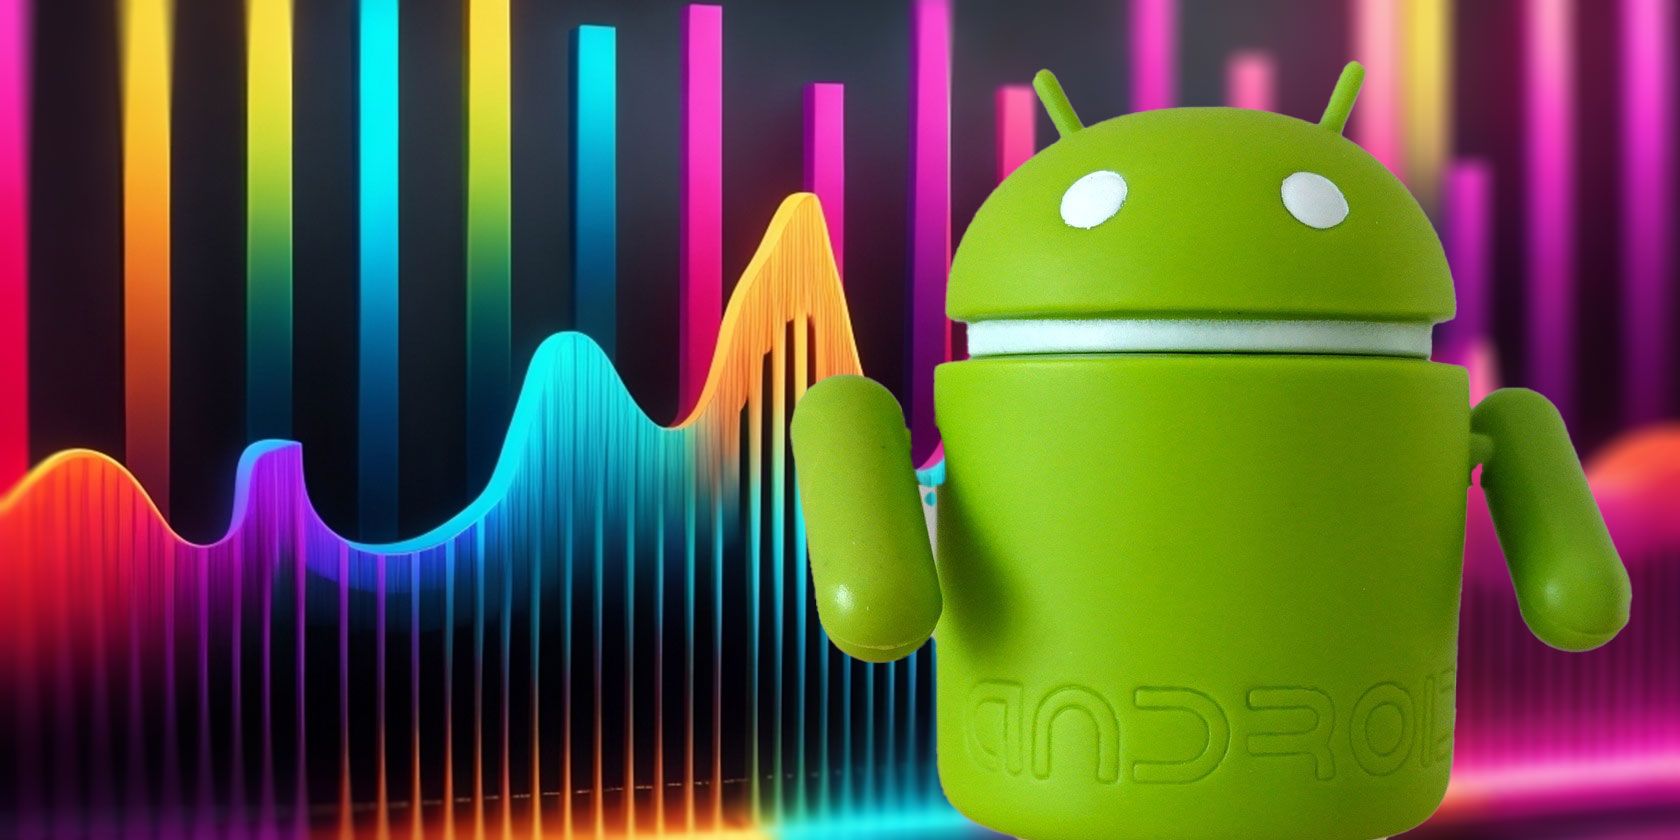 Sound equalizer concept on the background with Android mascot in front